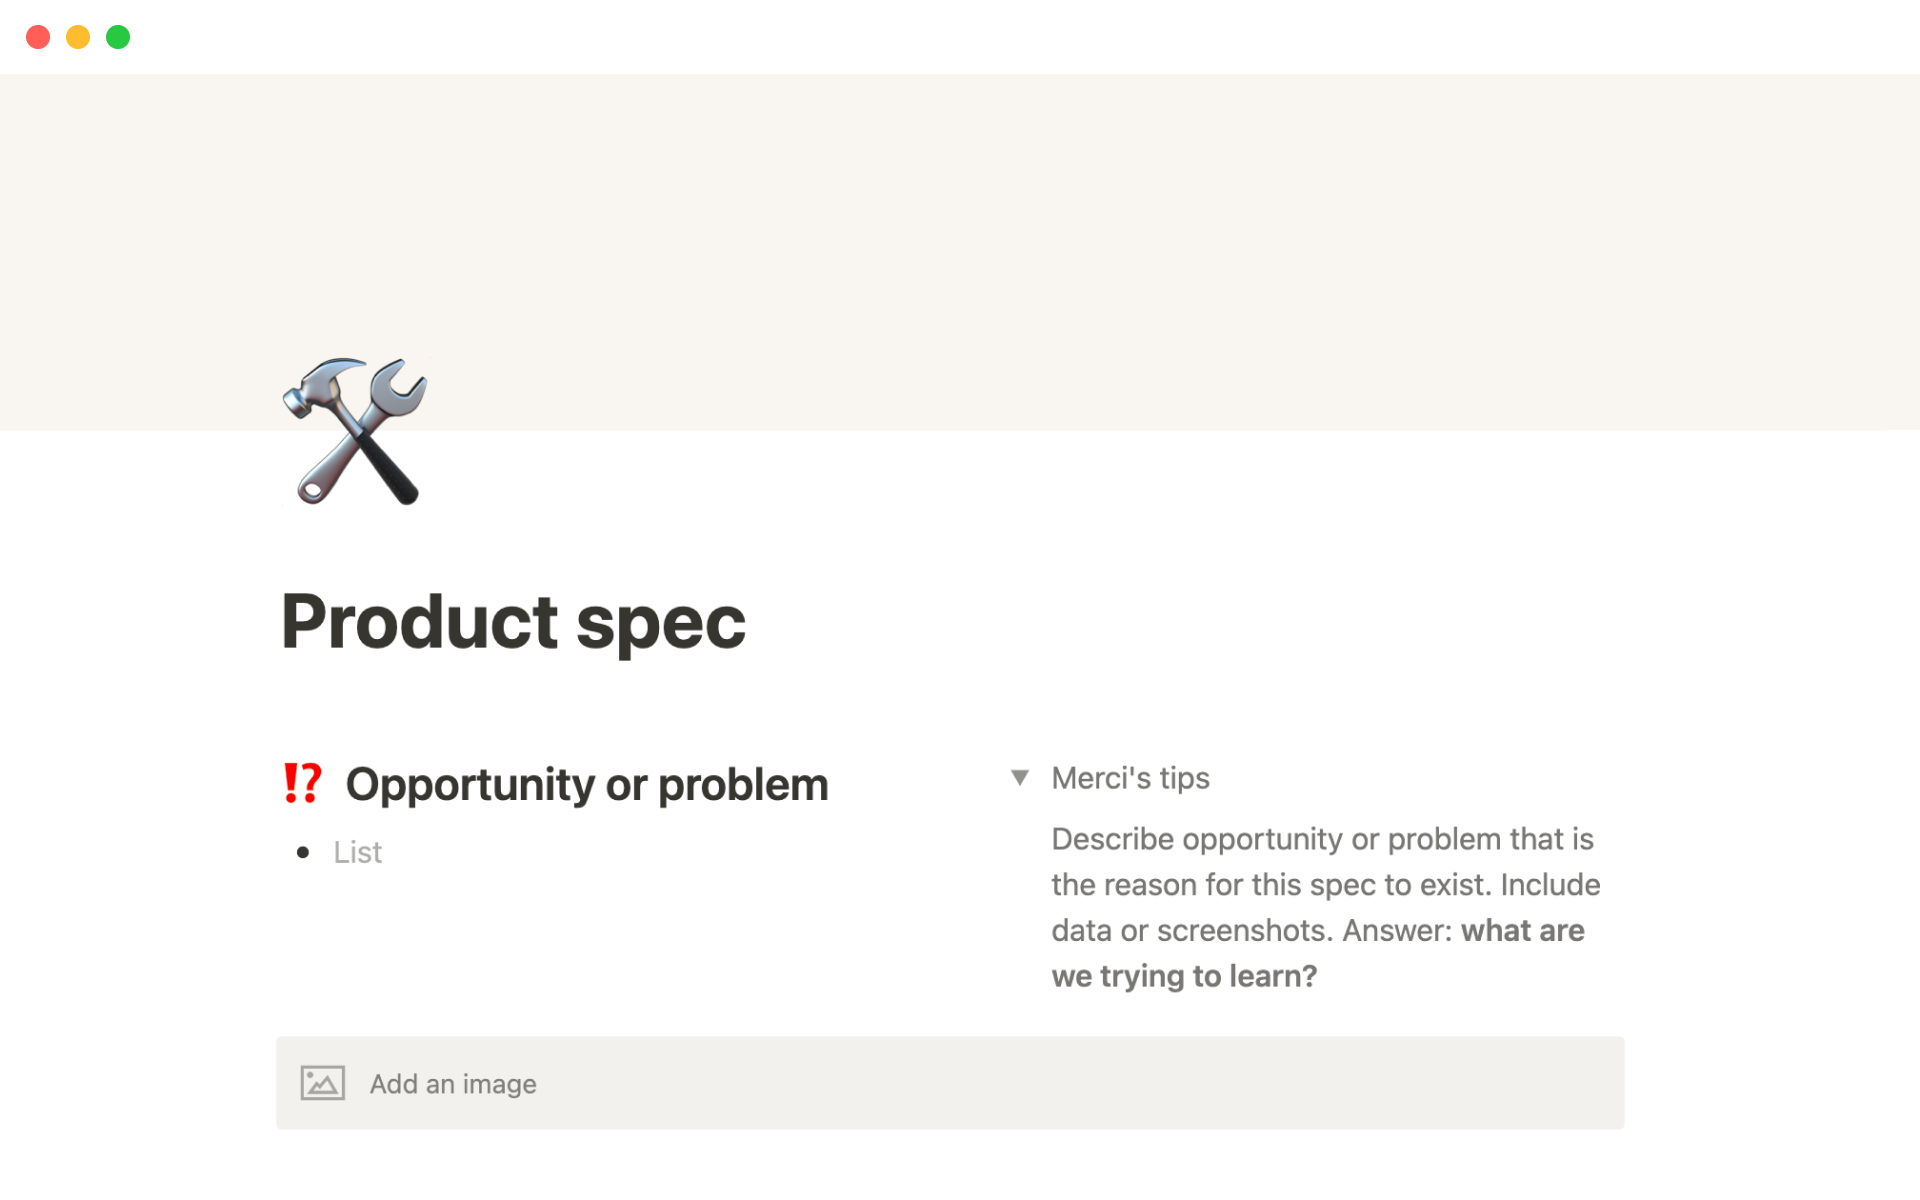 The desktop image for the Merci Grace's product spec template